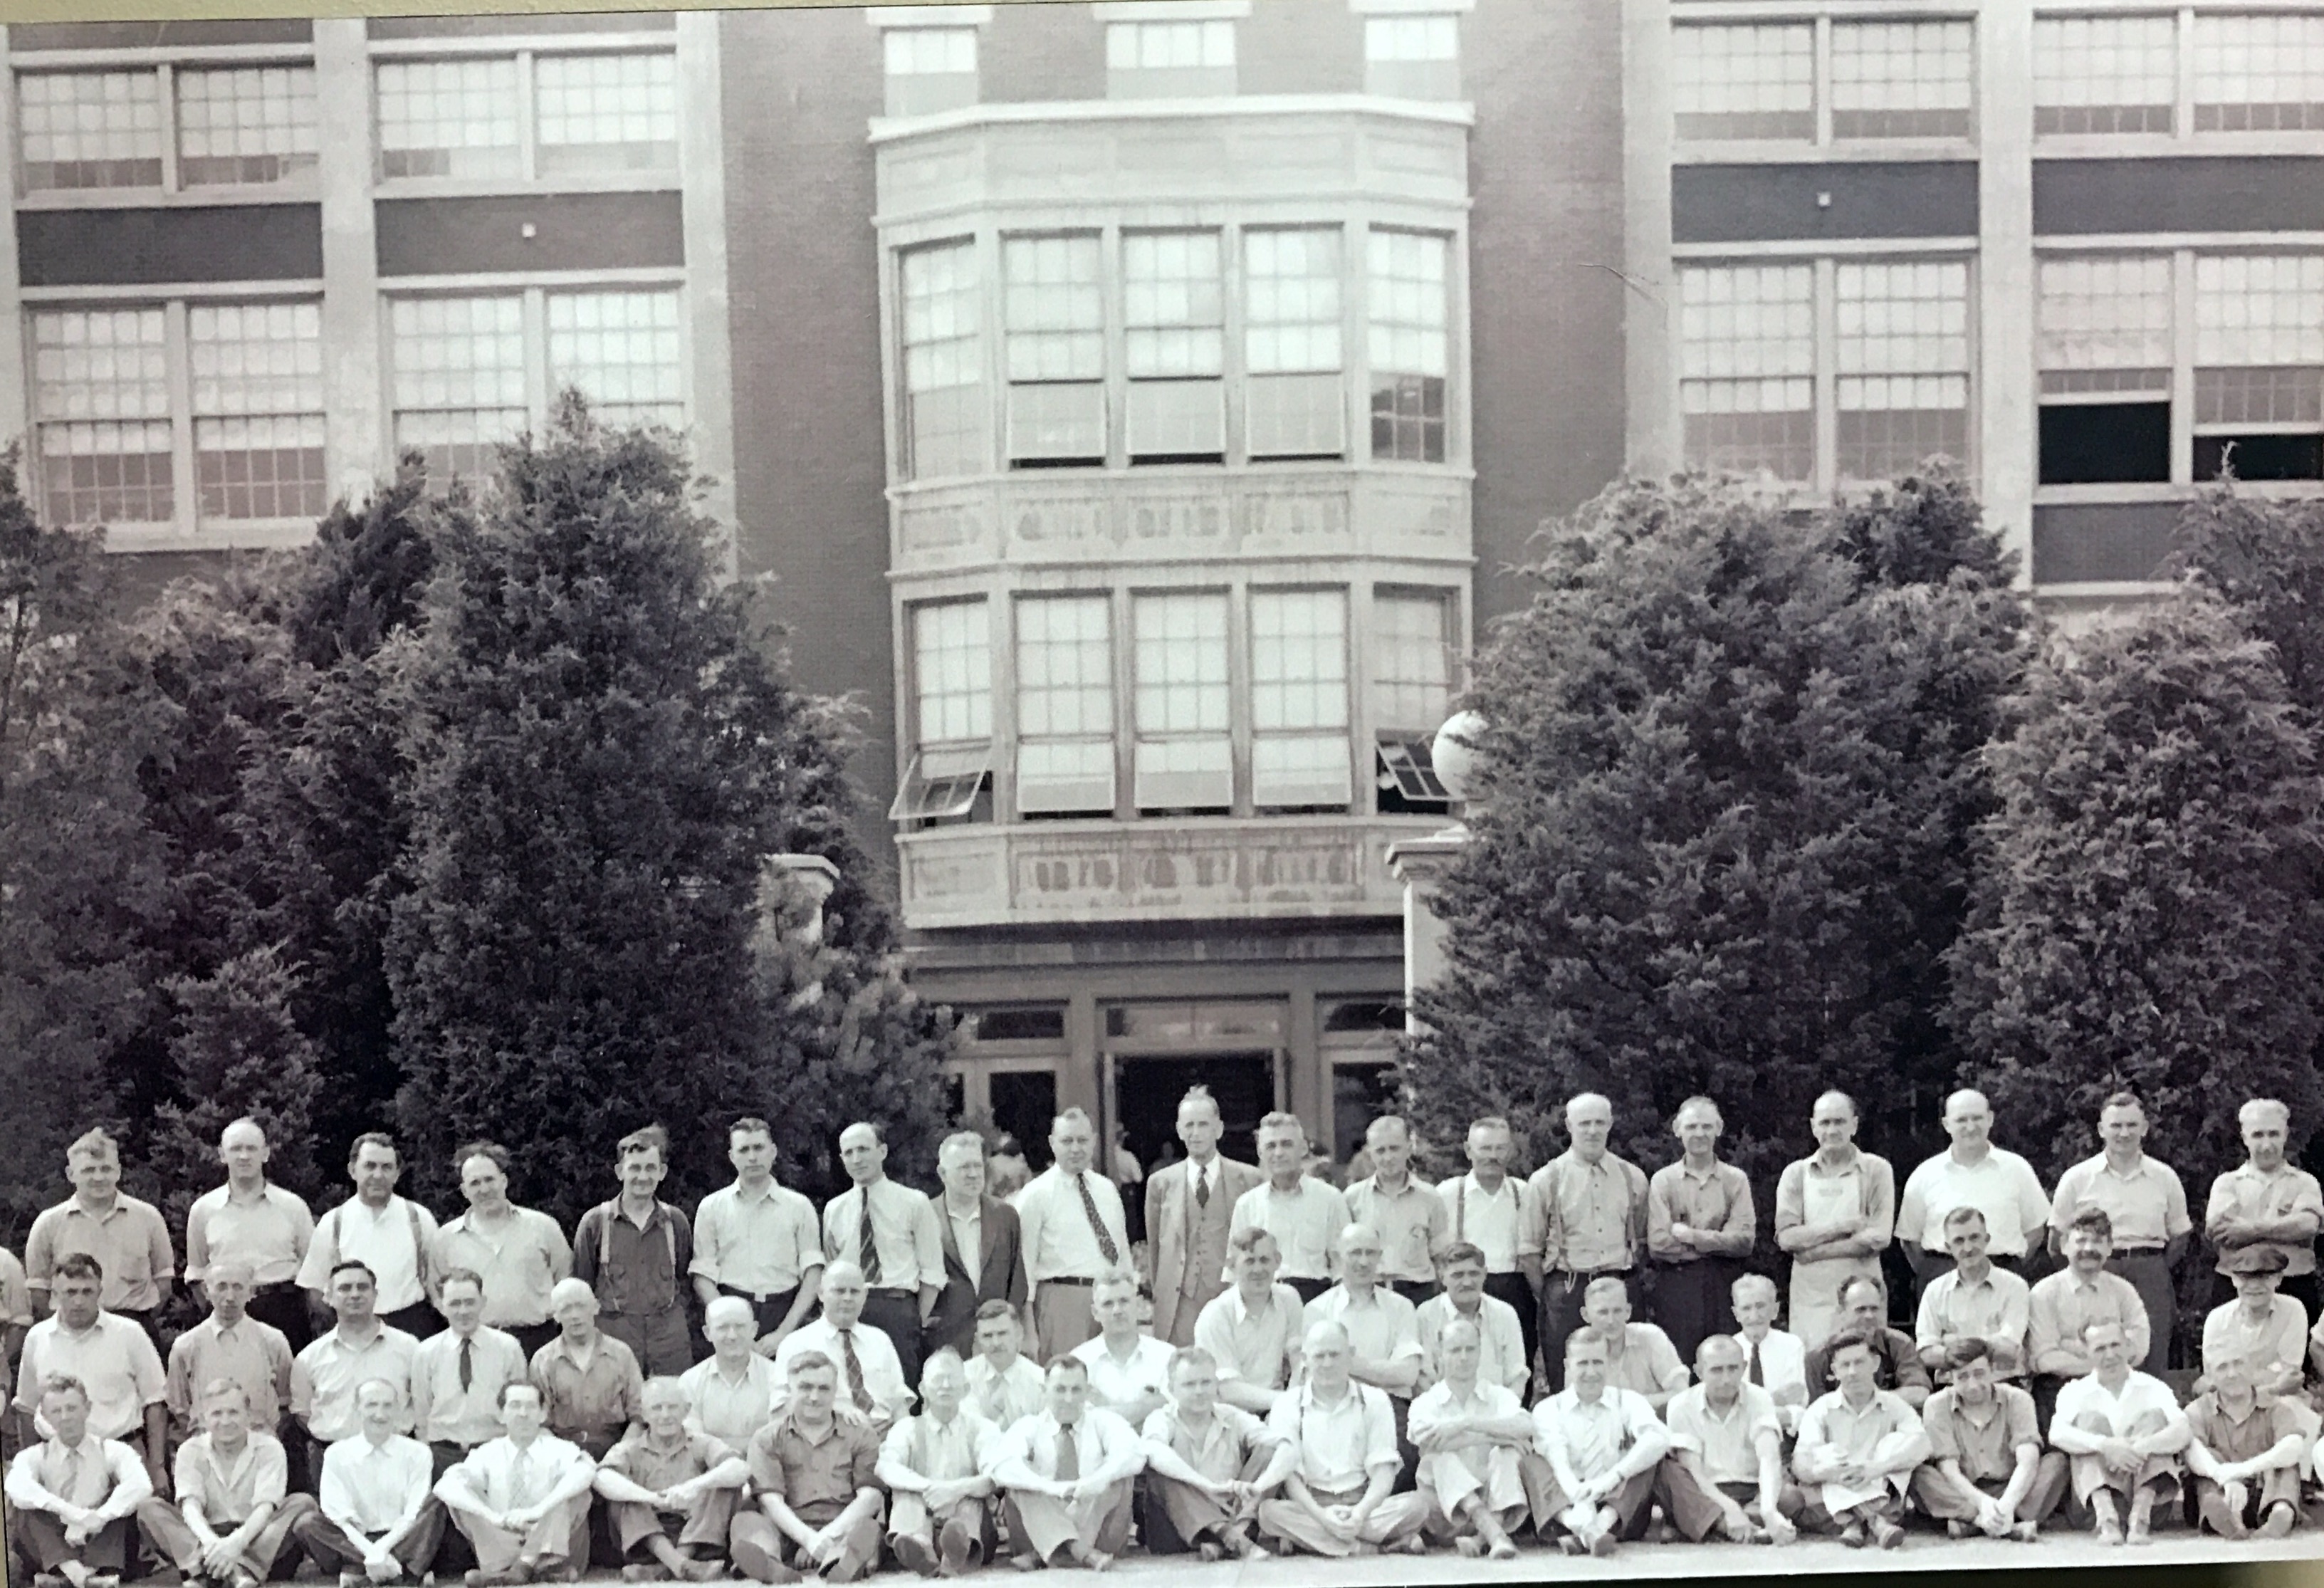 The Wurlitzer Organ manufacturing Plant and some of its employees. Cir. 1940